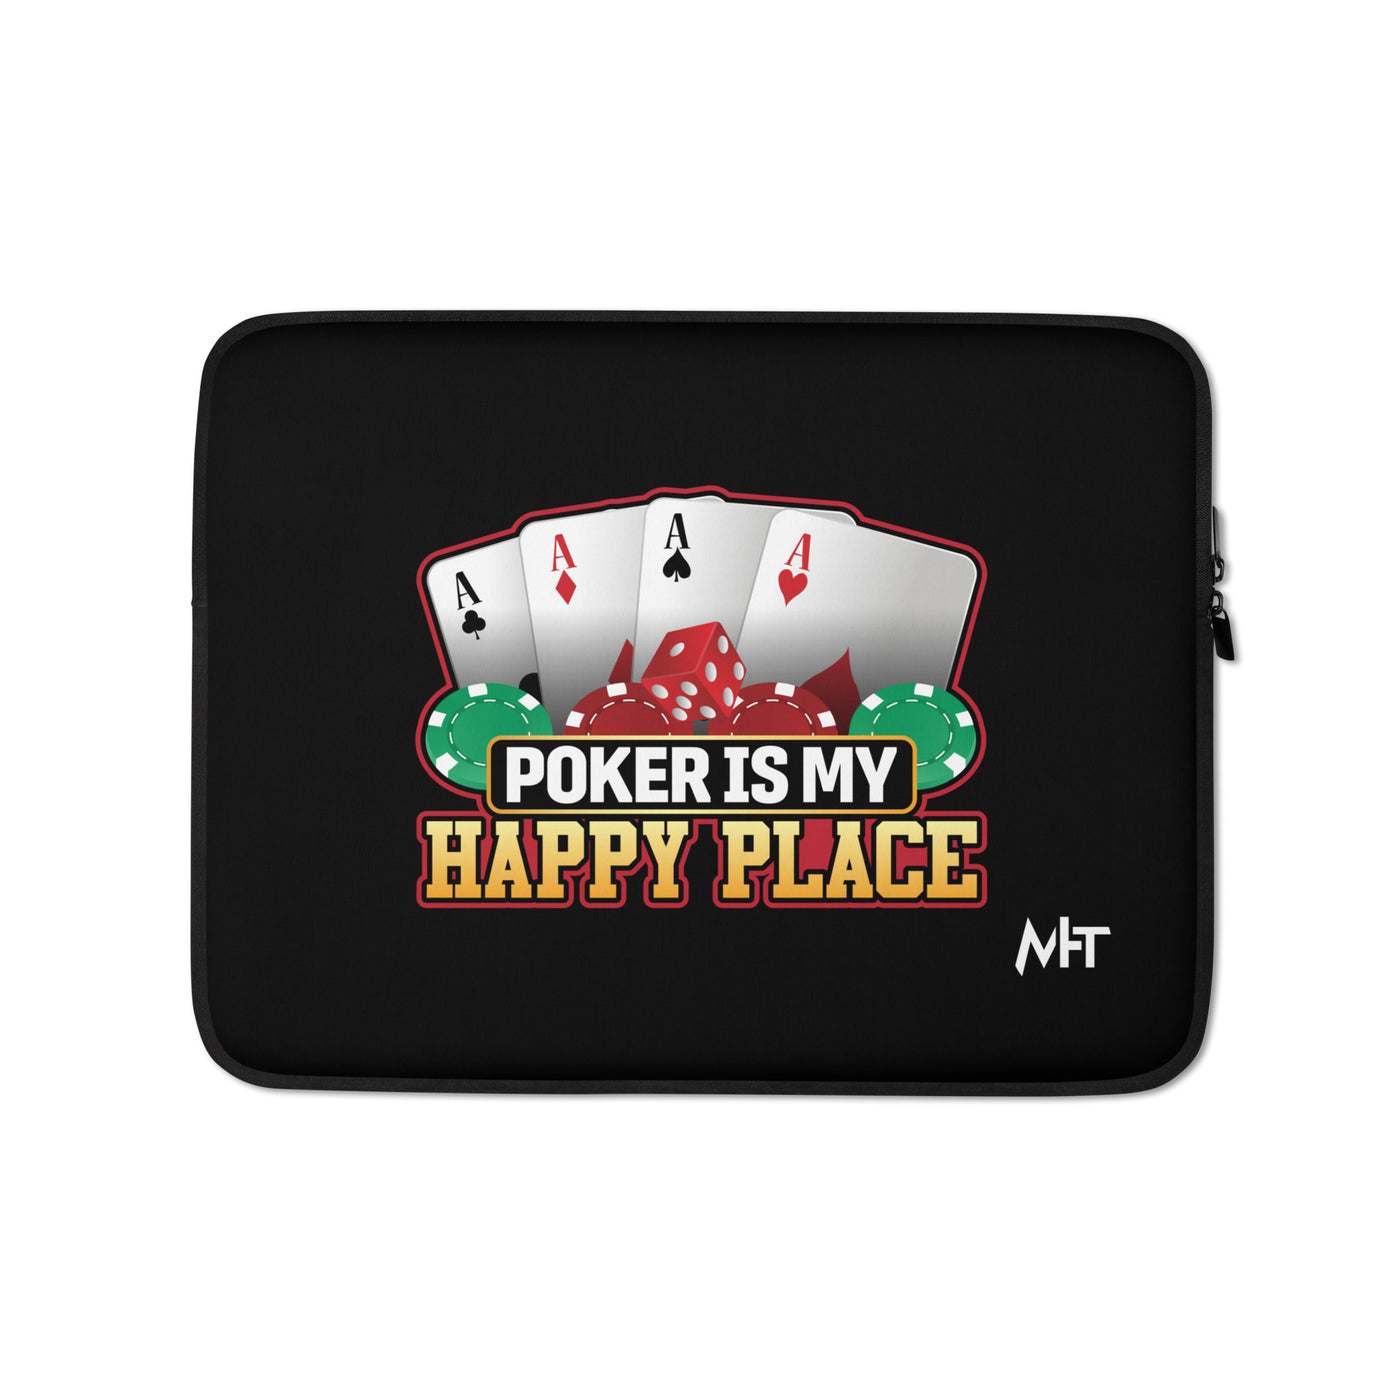 Poker Dad is like a Normal Dad but much Cooler - Laptop Sleeve